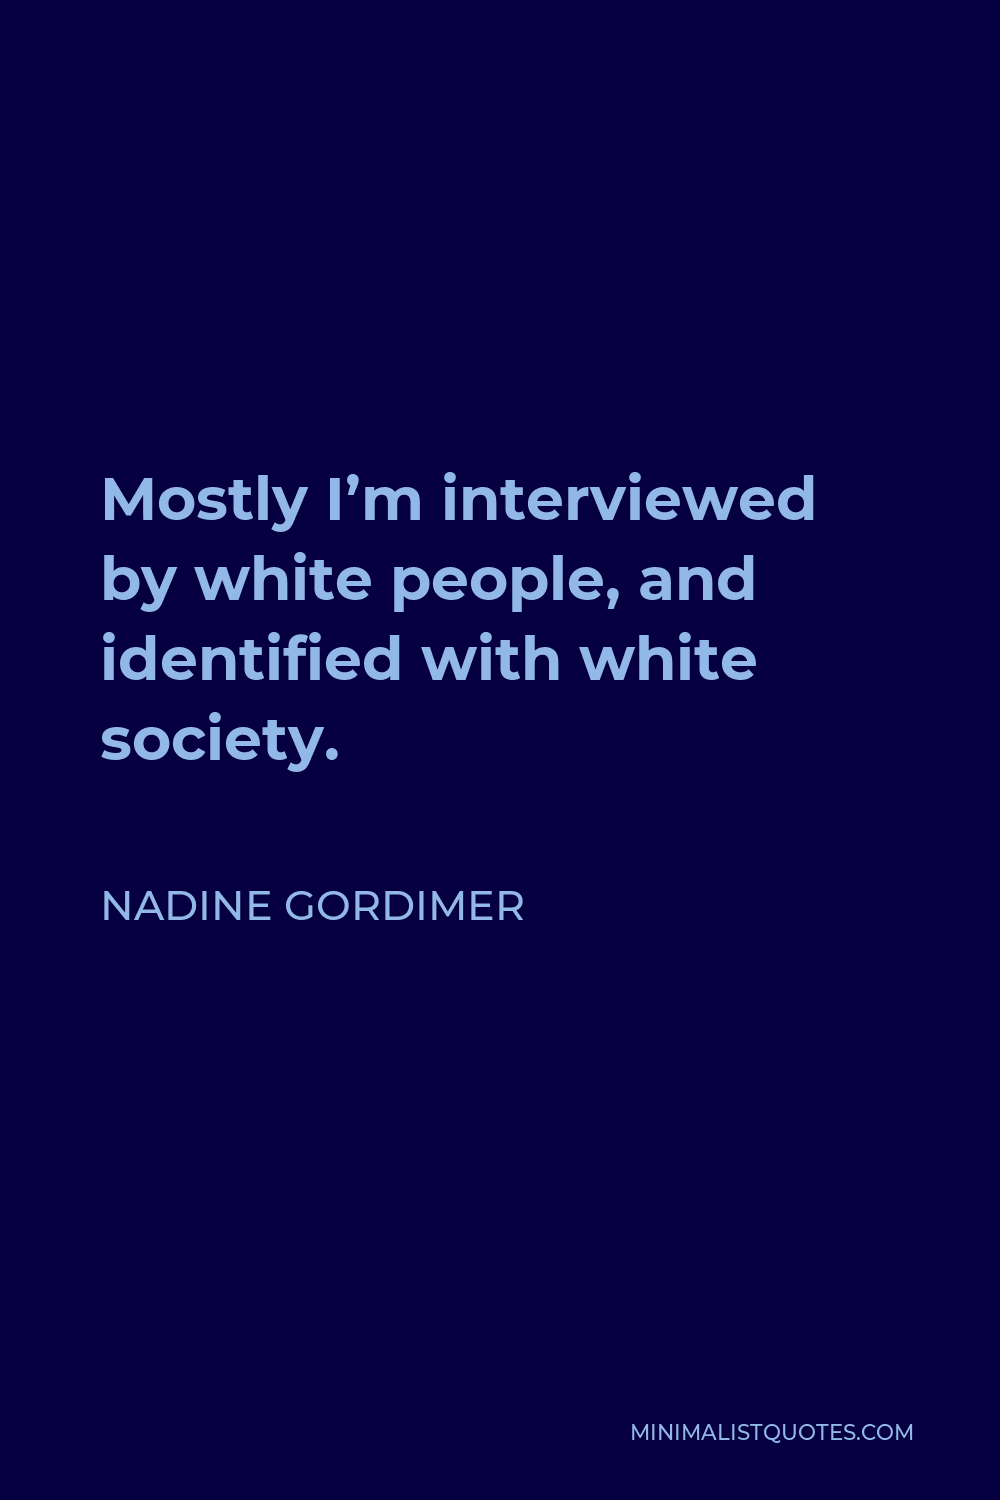 Nadine Gordimer Quote - Mostly I’m interviewed by white people, and identified with white society.